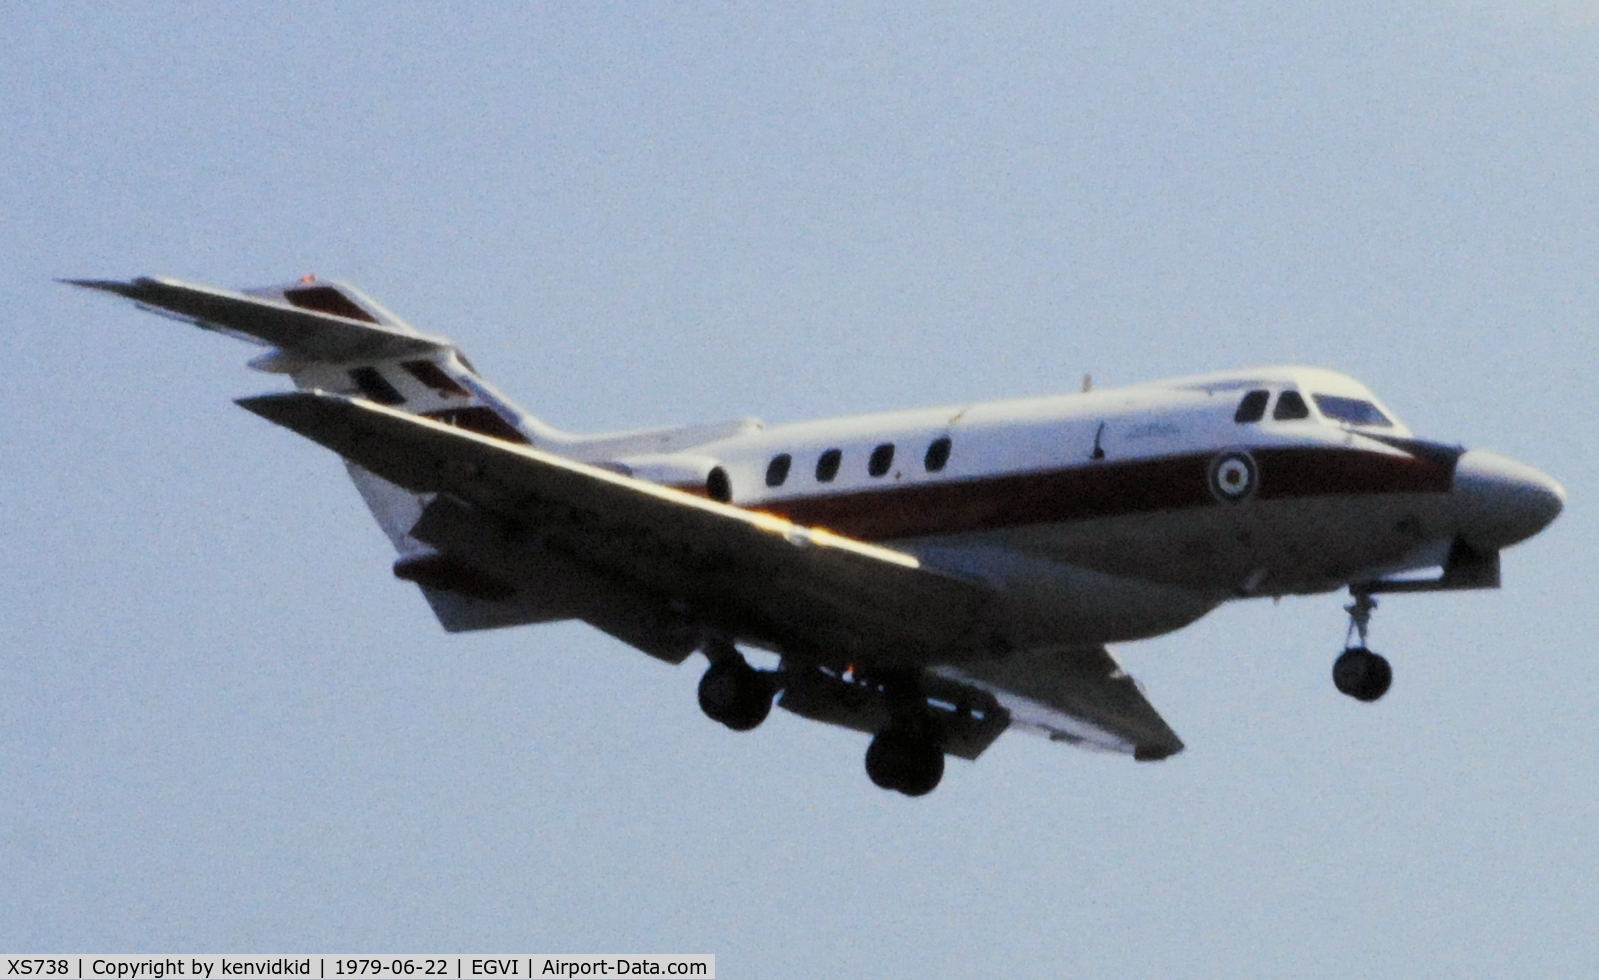 XS738, 1966 Hawker Siddeley HS.125 Dominie T.1 C/N 25077, At the 1979 International Air Tattoo Greenham Common, copied from slide.